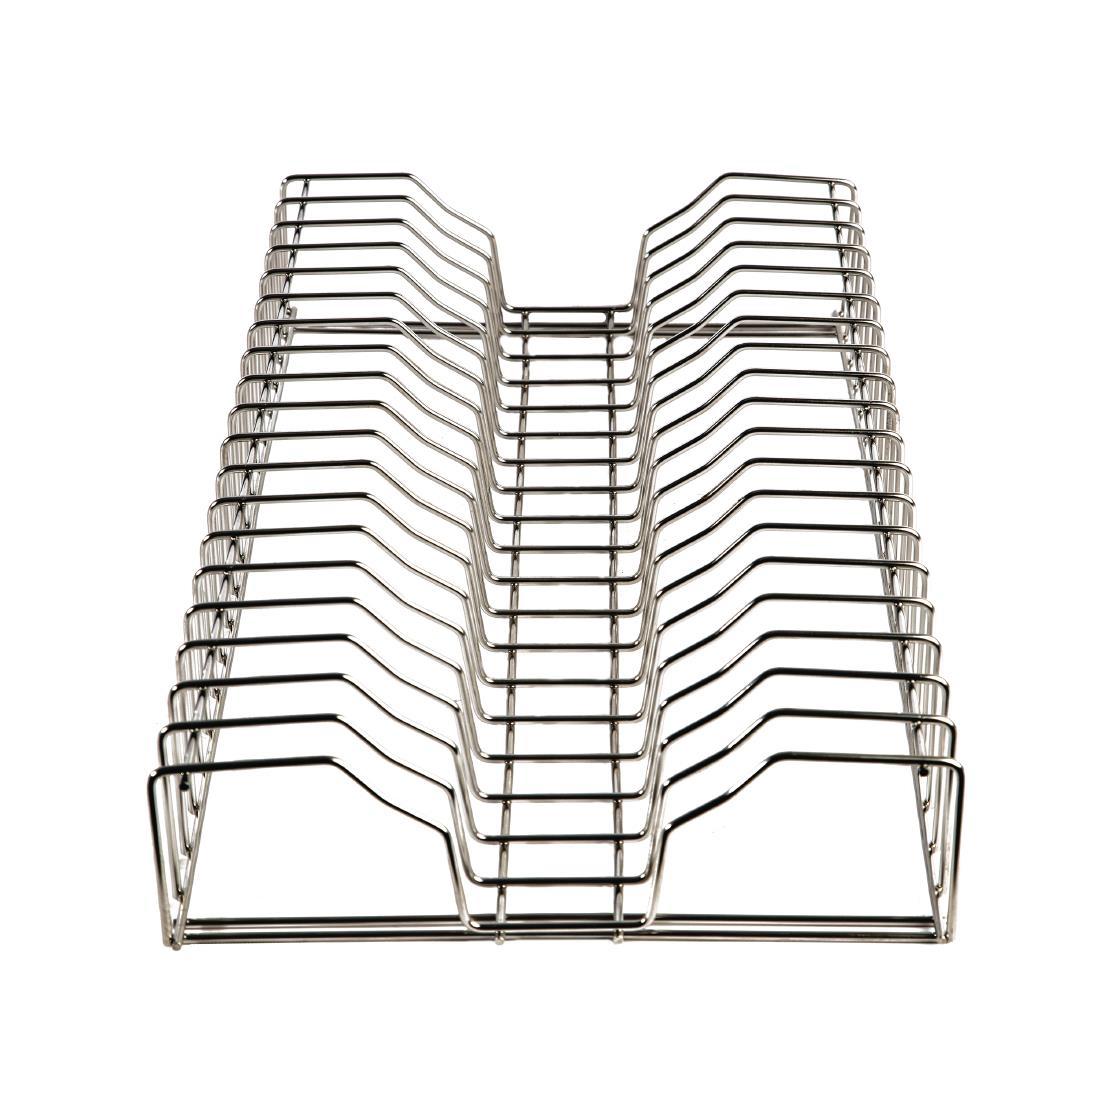 Vogue Stainless Steel Plate Racks 600mm - L440  - 2